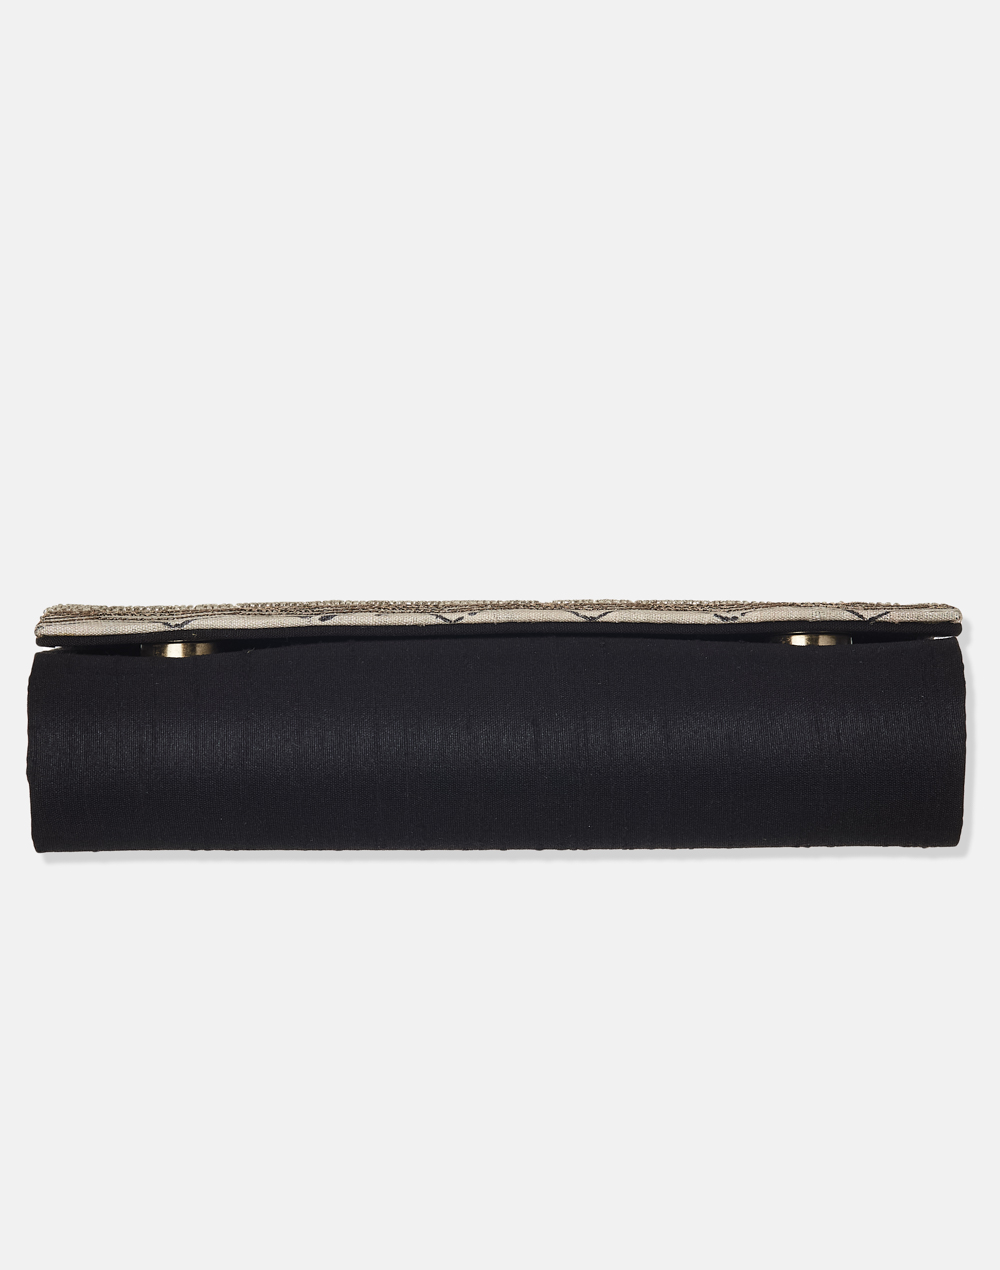 Black Hand Embroidered Clutch